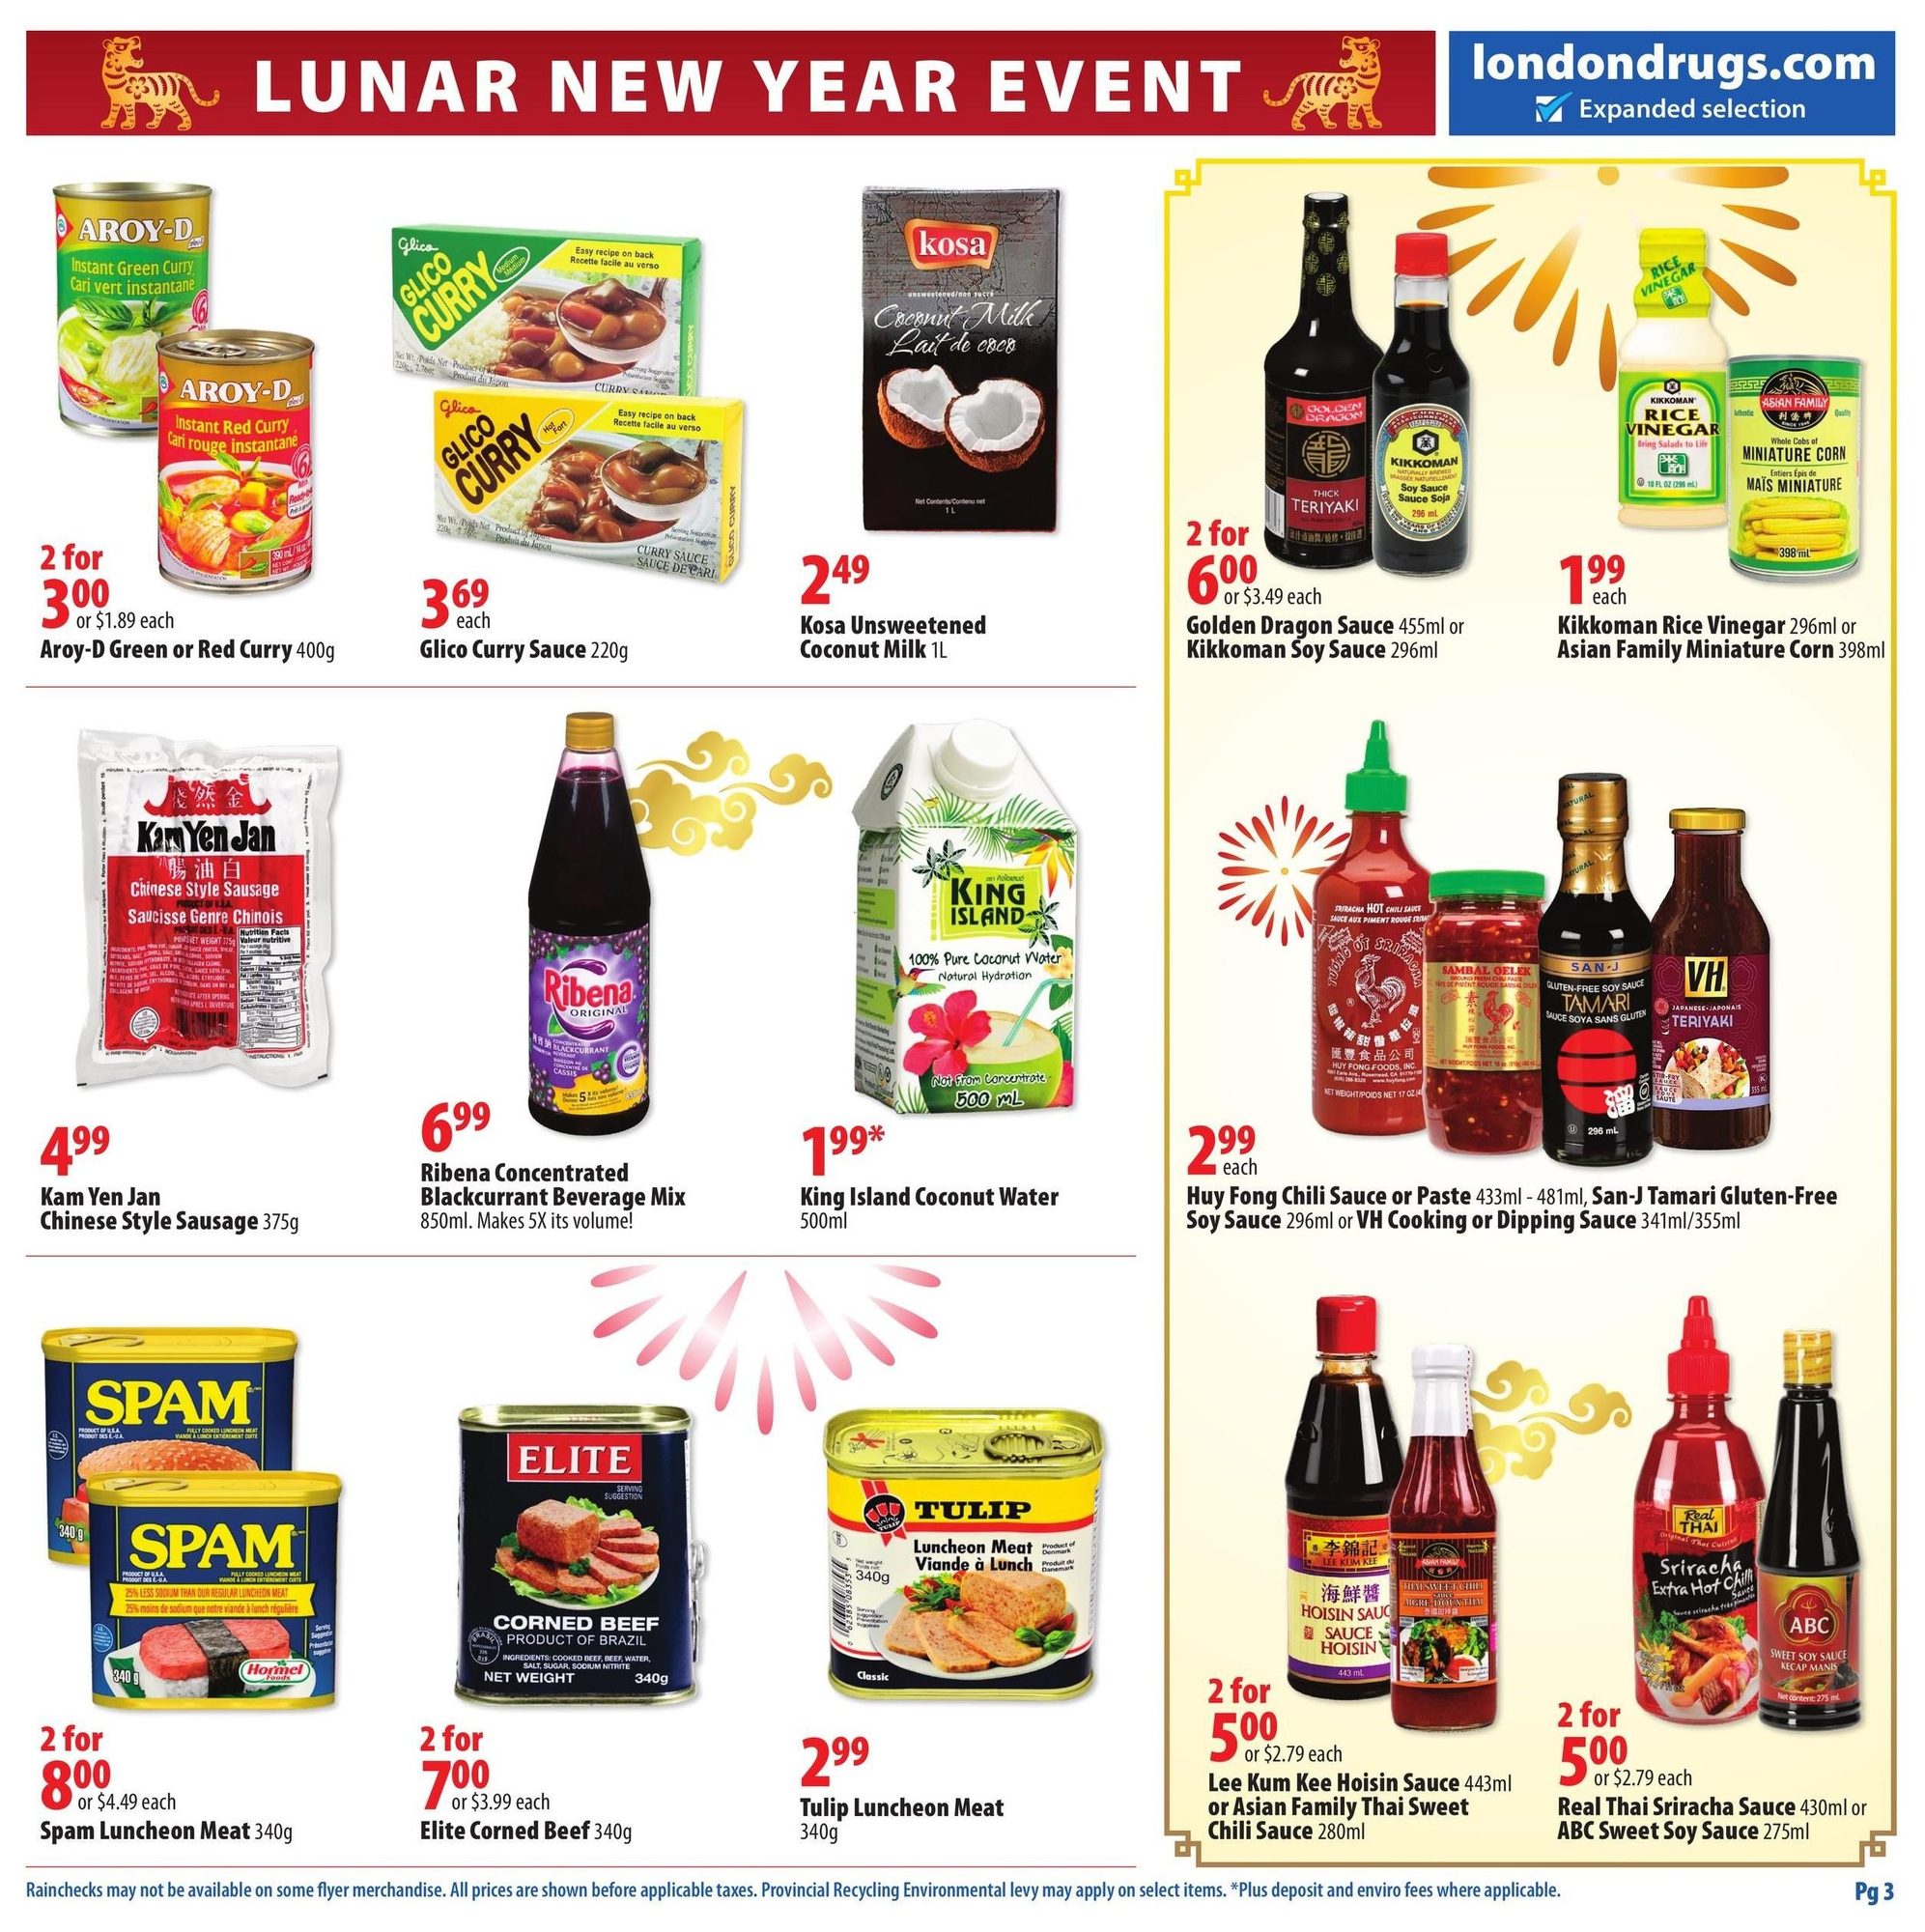 London Drugs - Lunar New Year Event - Page 3